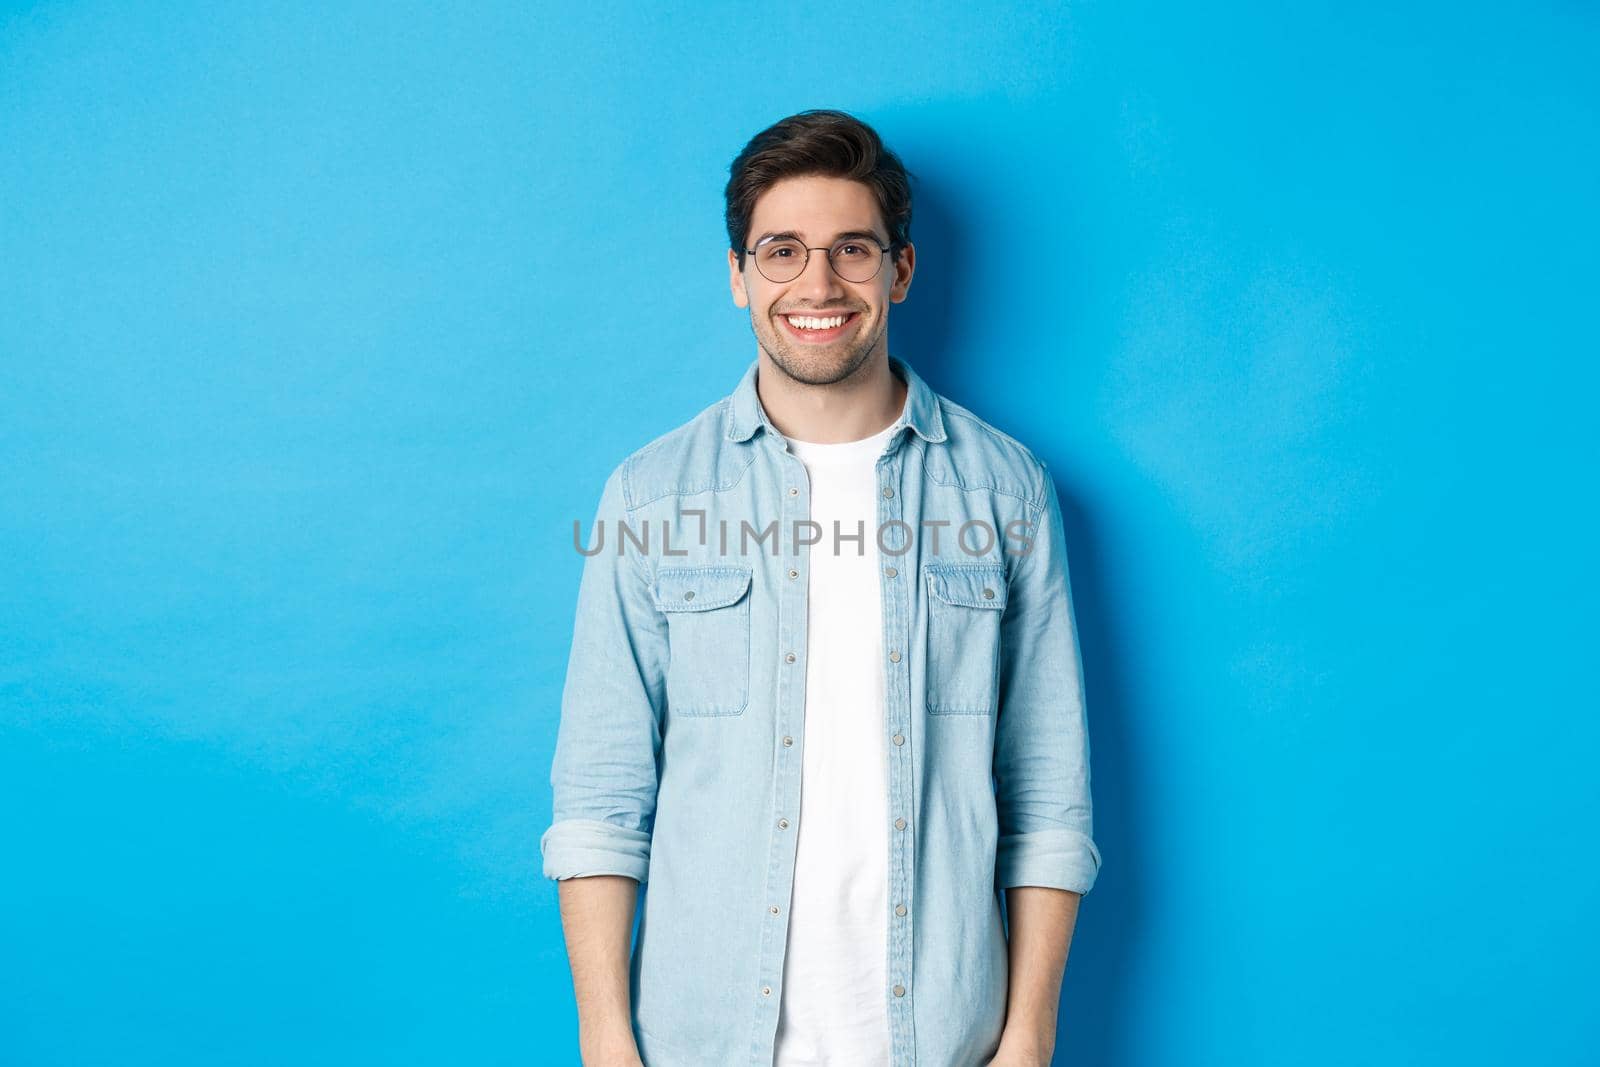 Young modern man in glasses and casual outfit standing against blue background, smiling happy at camera.